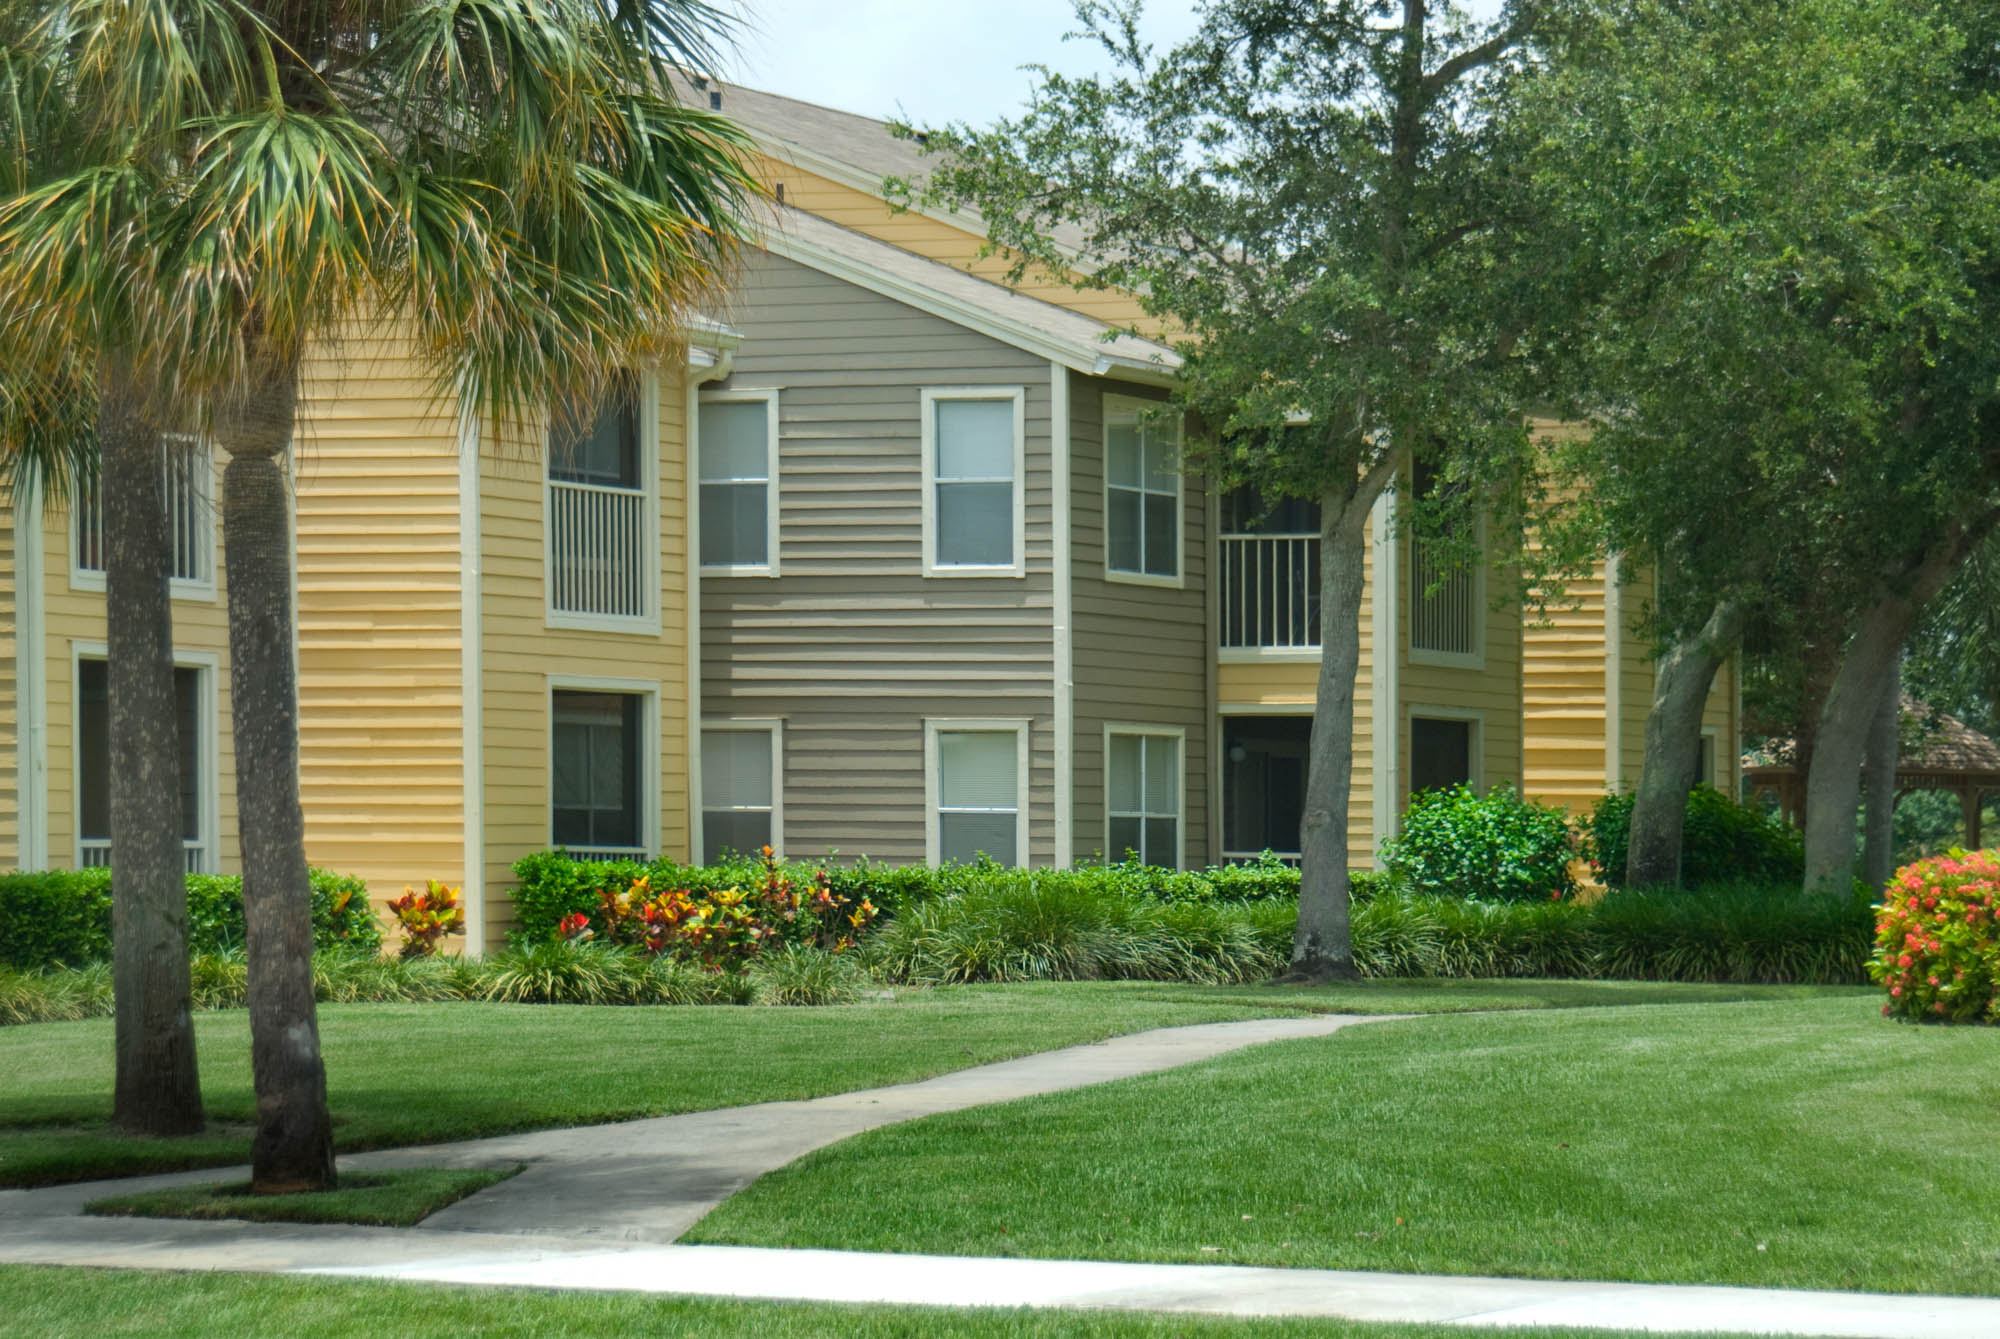 The apartments at Turtle Cove in West Palm Beach, FL.